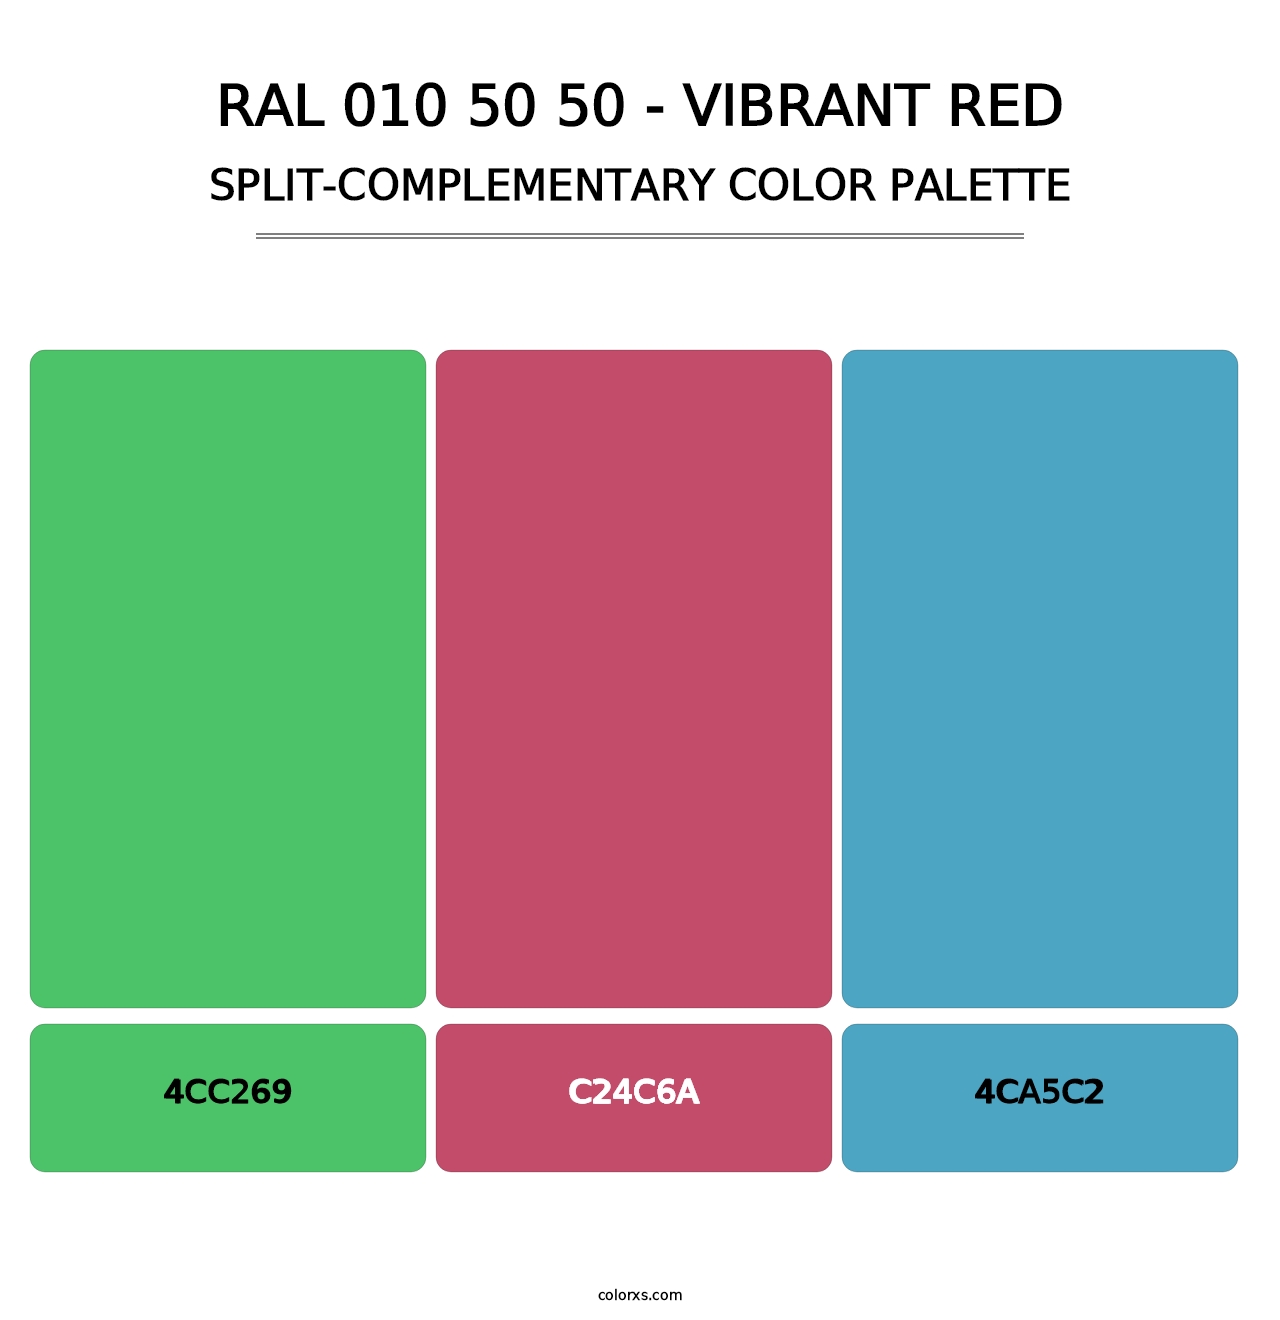 RAL 010 50 50 - Vibrant Red - Split-Complementary Color Palette